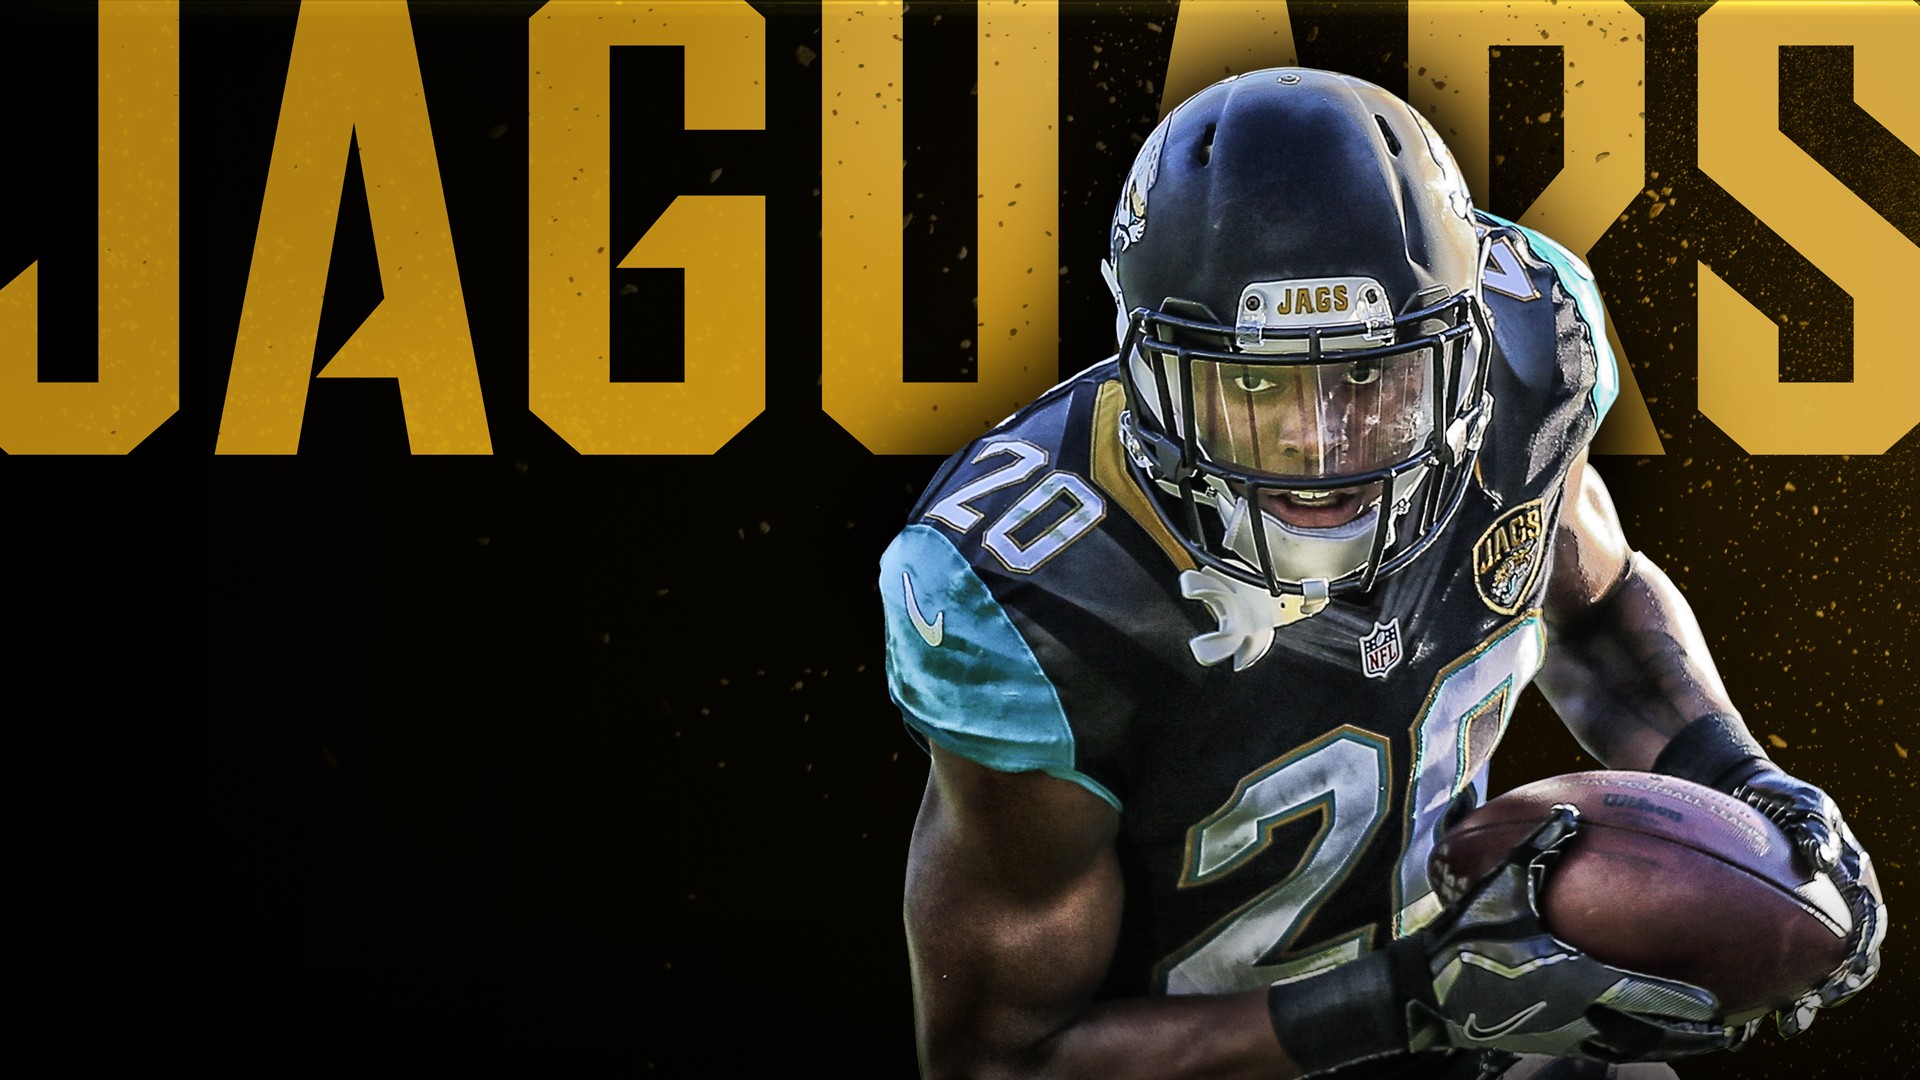 Jacksonville Jaguars Wallpaper For Mac Backgrounds With Resolution 1920X1080 pixel. You can make this wallpaper for your Mac or Windows Desktop Background, iPhone, Android or Tablet and another Smartphone device for free